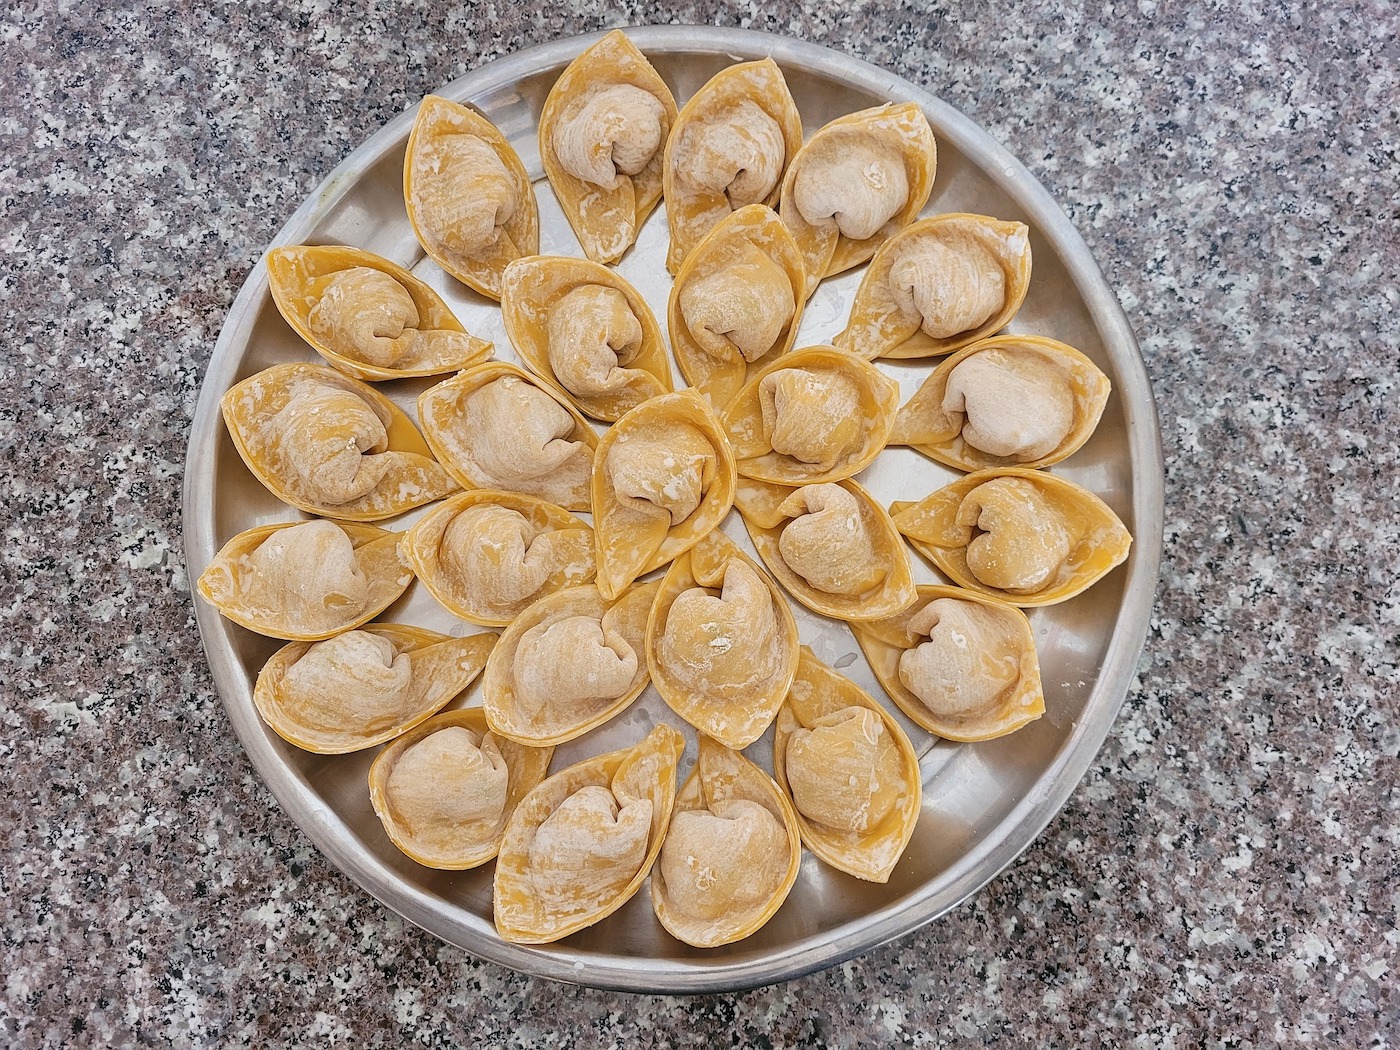 Uncooked wontons, one of the types of Chinese dumplings, sit on a metal tray